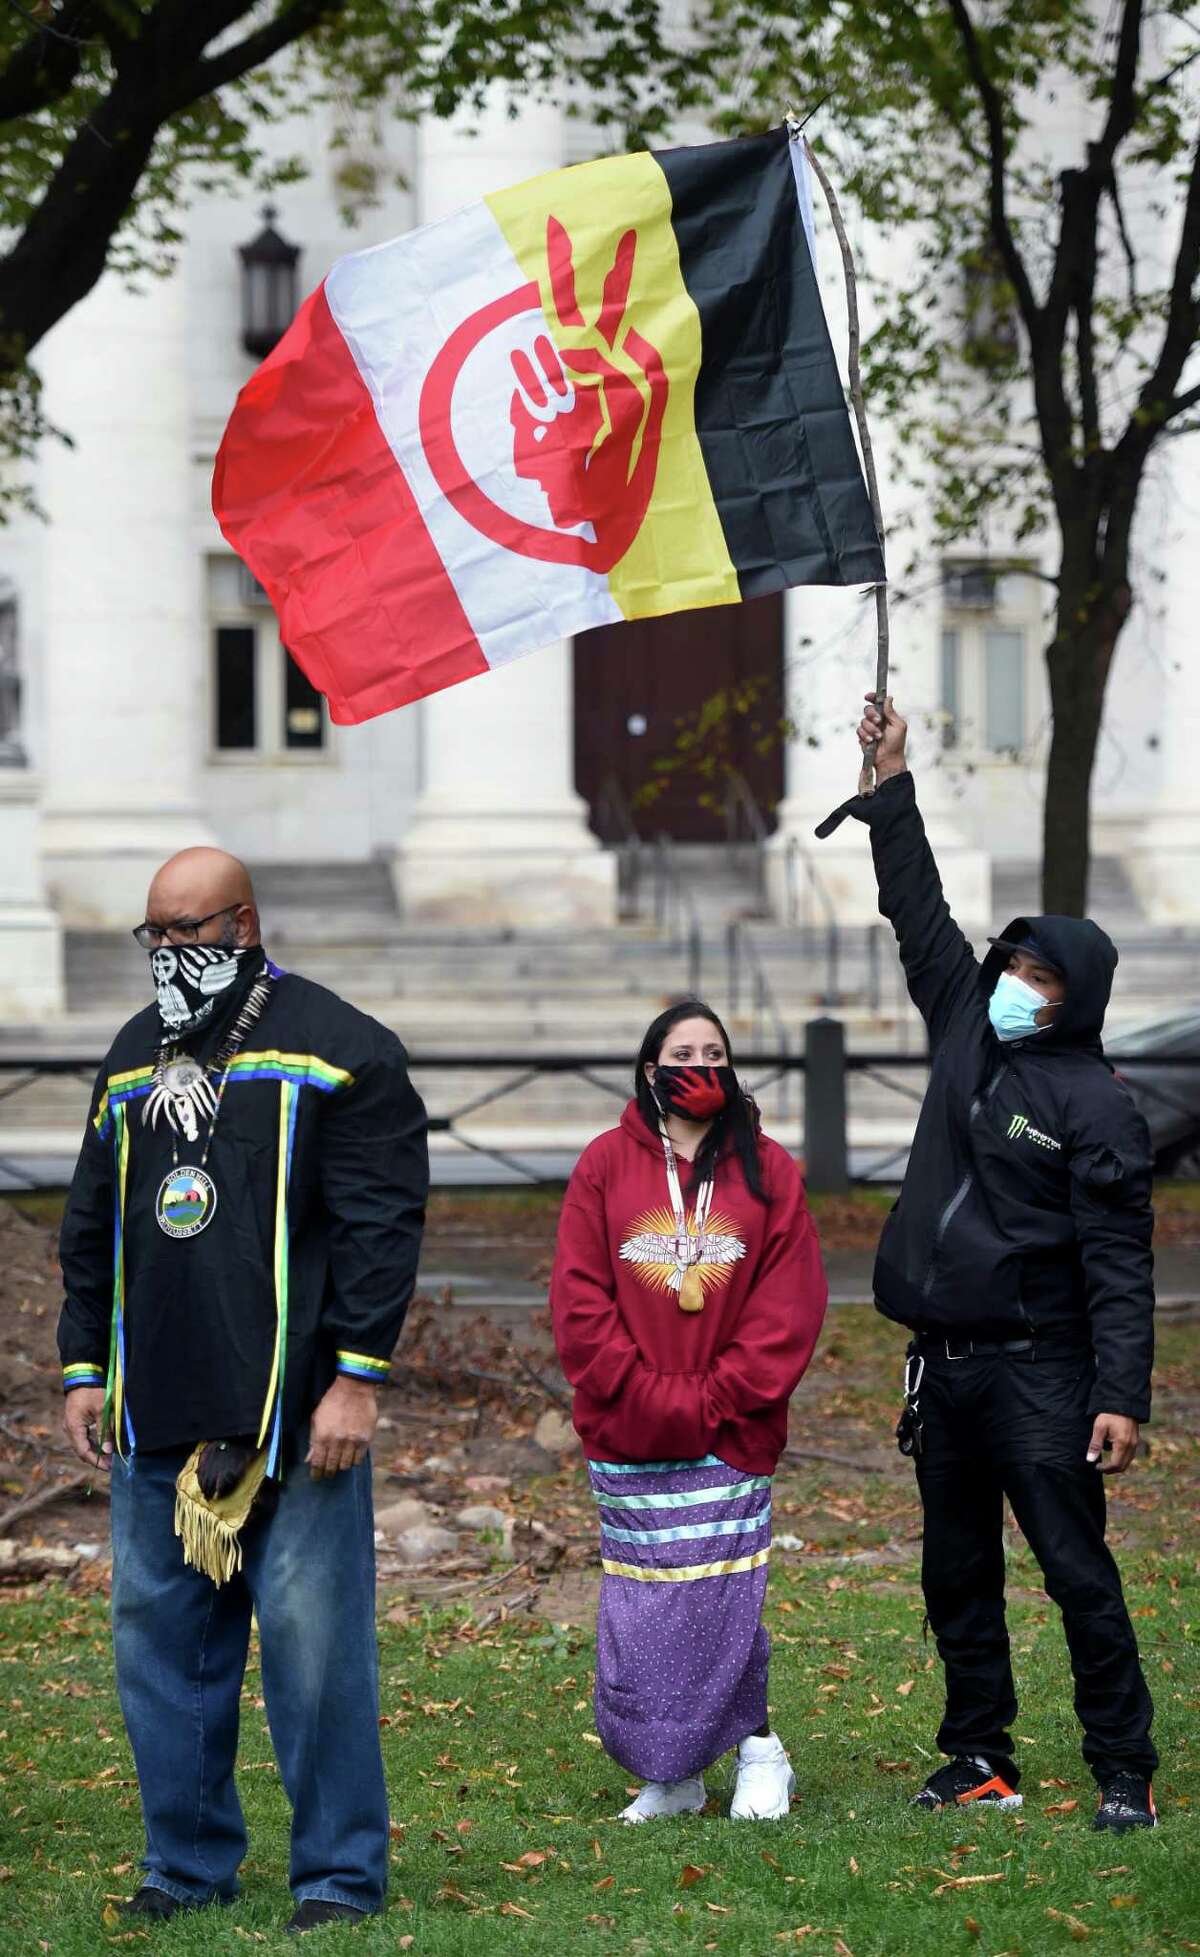 From left, Richard Cowes or Soaring Bear, Rachel Massaro and Radames Figueroa participate in a celebration of Indigenous Peoples' Day on the New Haven Green on October 12, 2020. Figueroa holds a flag of the American Indian Movement. For Clement, Monday’s holiday brought out an array of emotions about the Indigenous experience. Last year, a statue of Christopher Columbus stood tall in Wooster Square Park. Since then, community activism led to the removal of the statue of the explorer who is a symbol of genocide for Indigenous people. Although the city has not recognized Indigenous Peoples Day, it also no longer recognizes Columbus Day, renaming it “Italian Heritage Day.” The school district recognizes the day as Indigenous Peoples Day following a Board of Education vote this year.